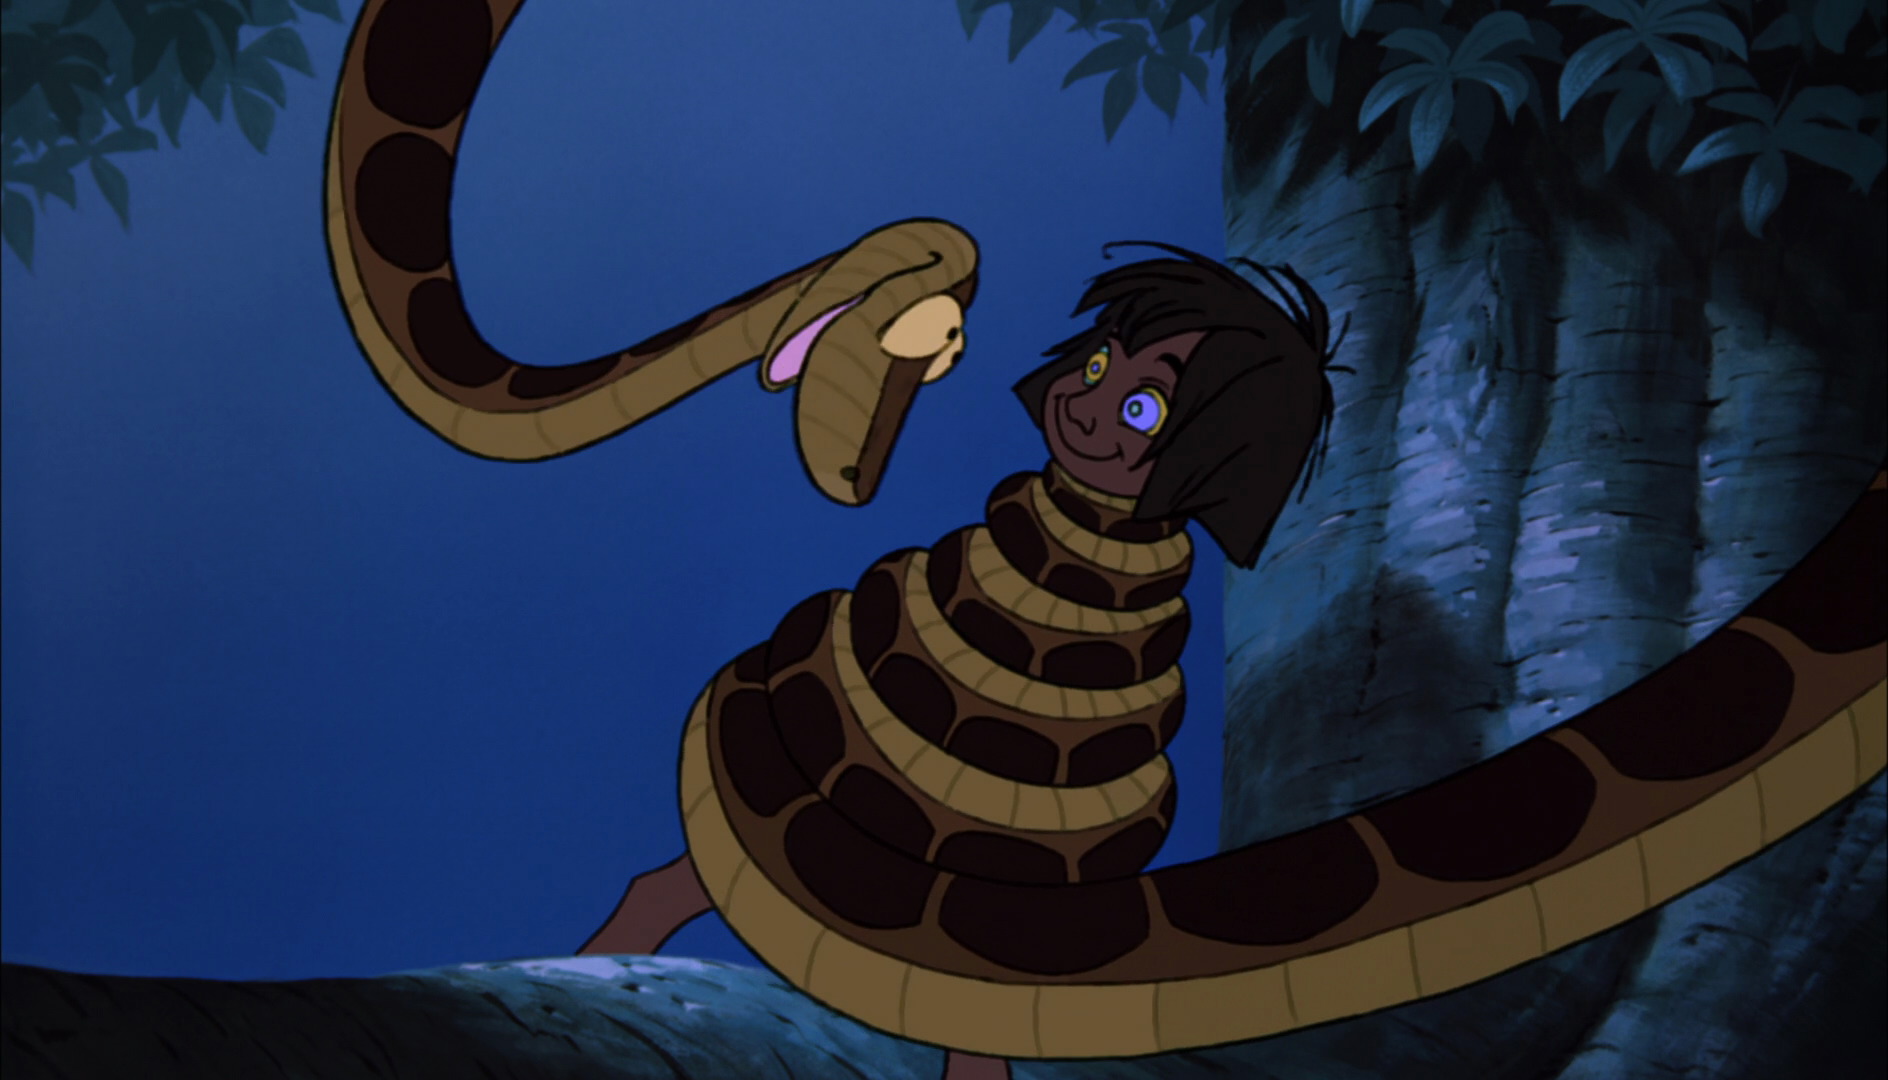 Mowgli_is_being_hypnotized_and_is_wraped_up_in_Kaa_the_python's_coils.jpg